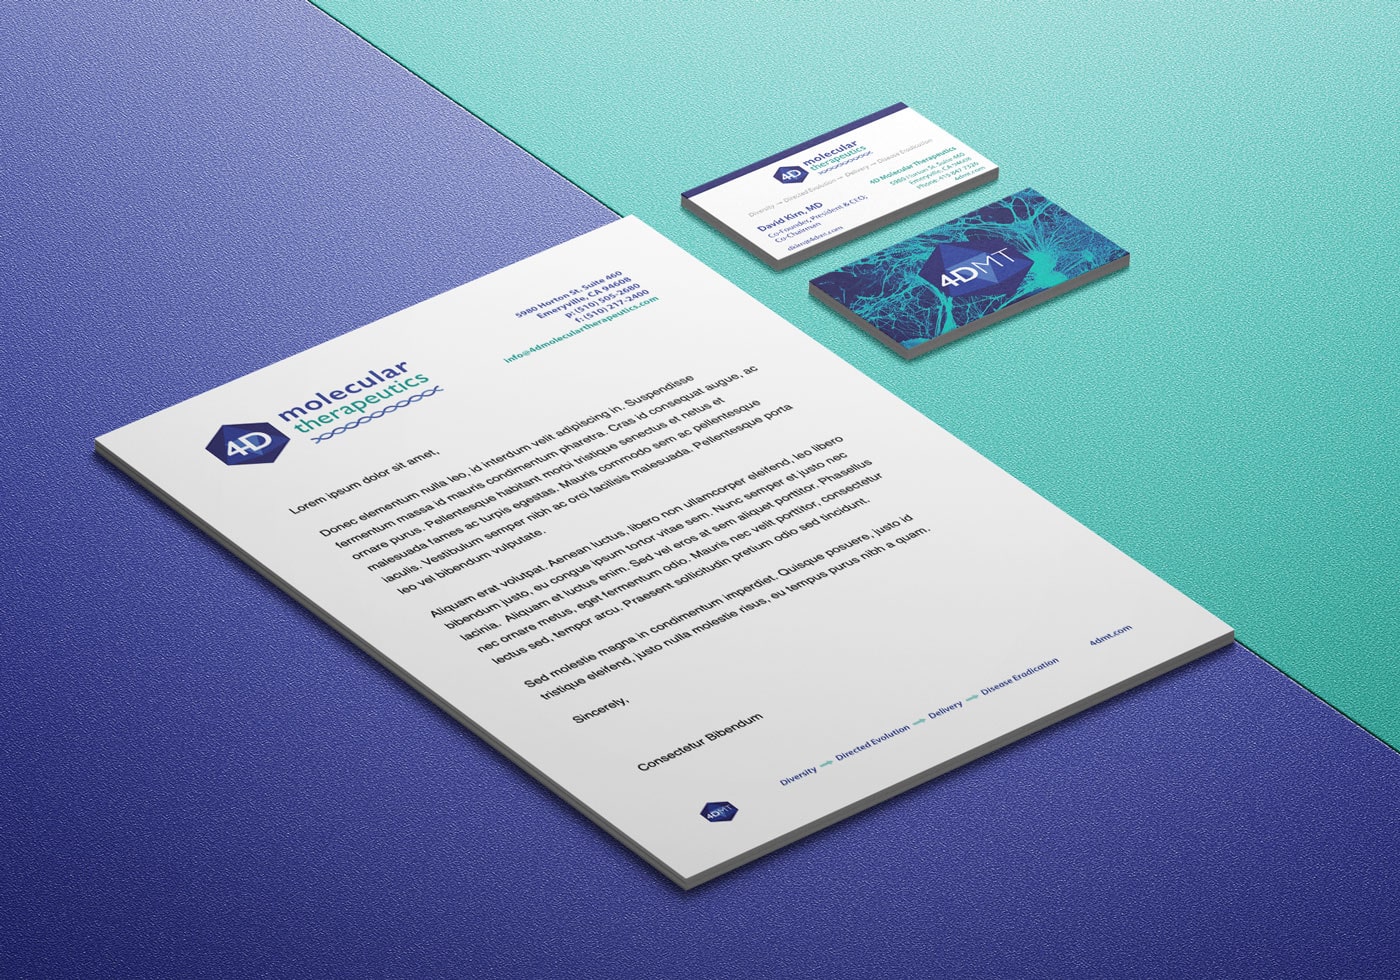 4DMT Letterhead and Business Cards Mockup